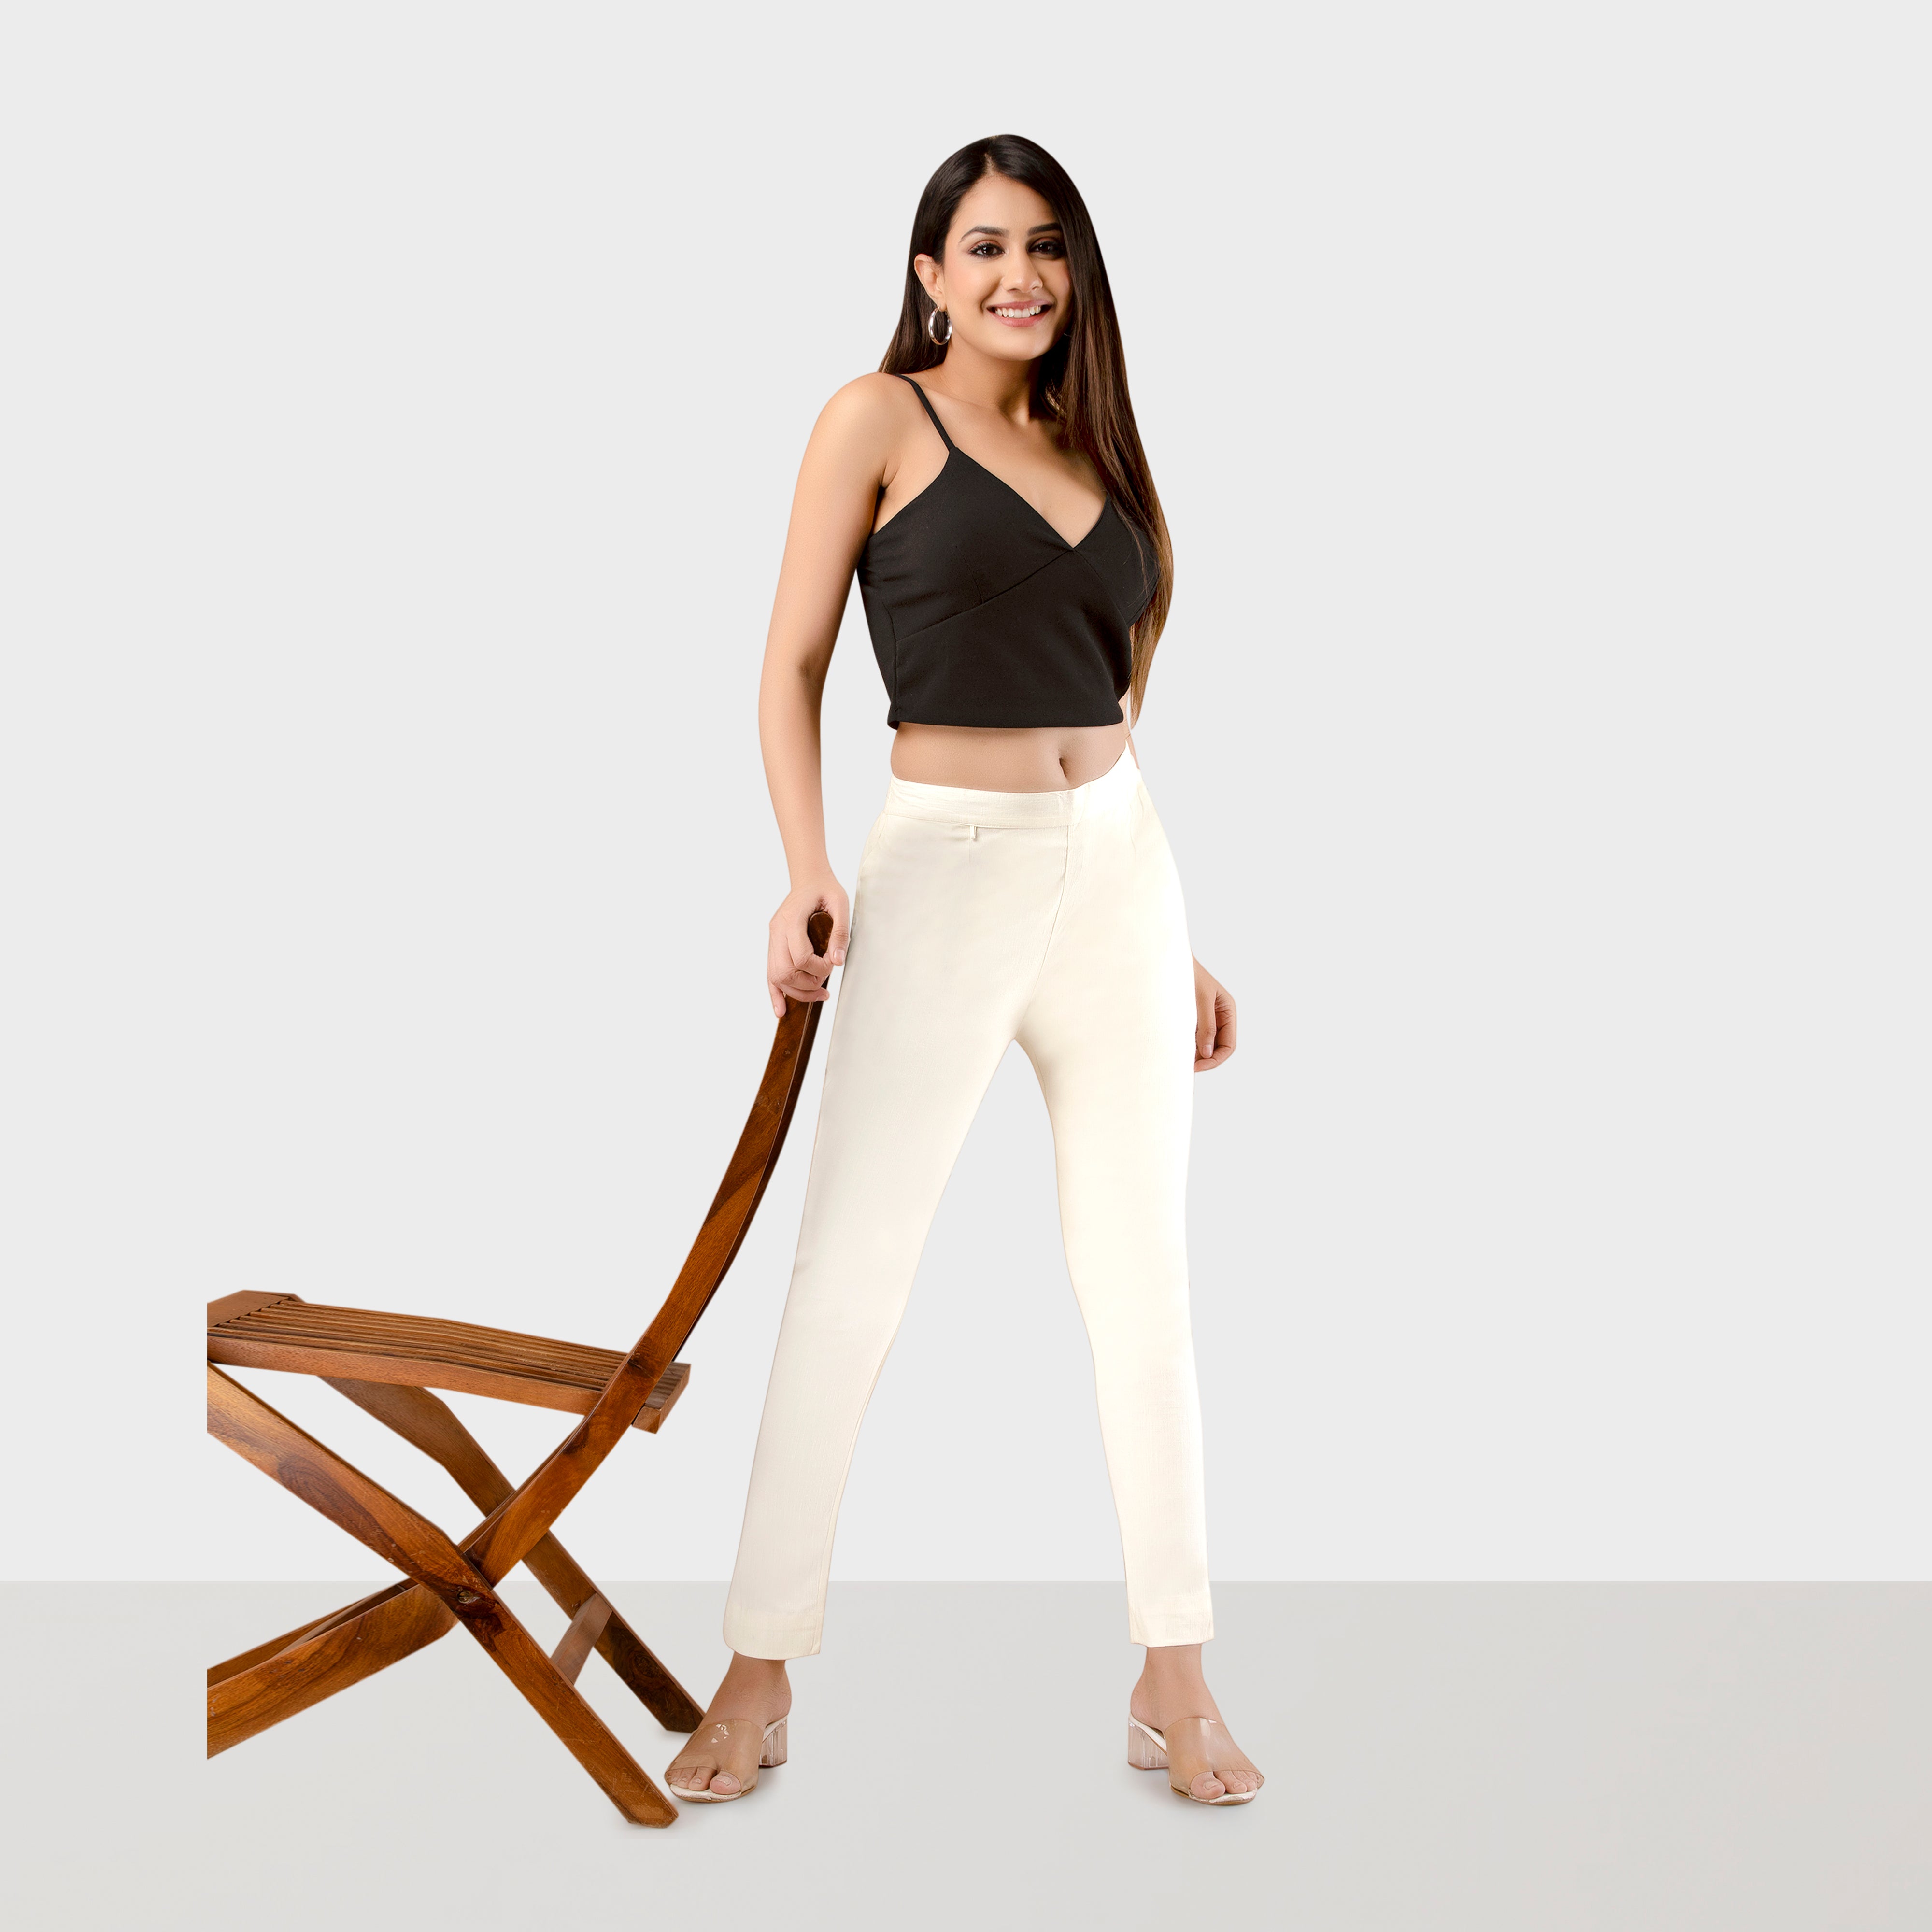 Stretchable Track Pant For Women - Cotton Lycra - (m To 5xl) at Rs